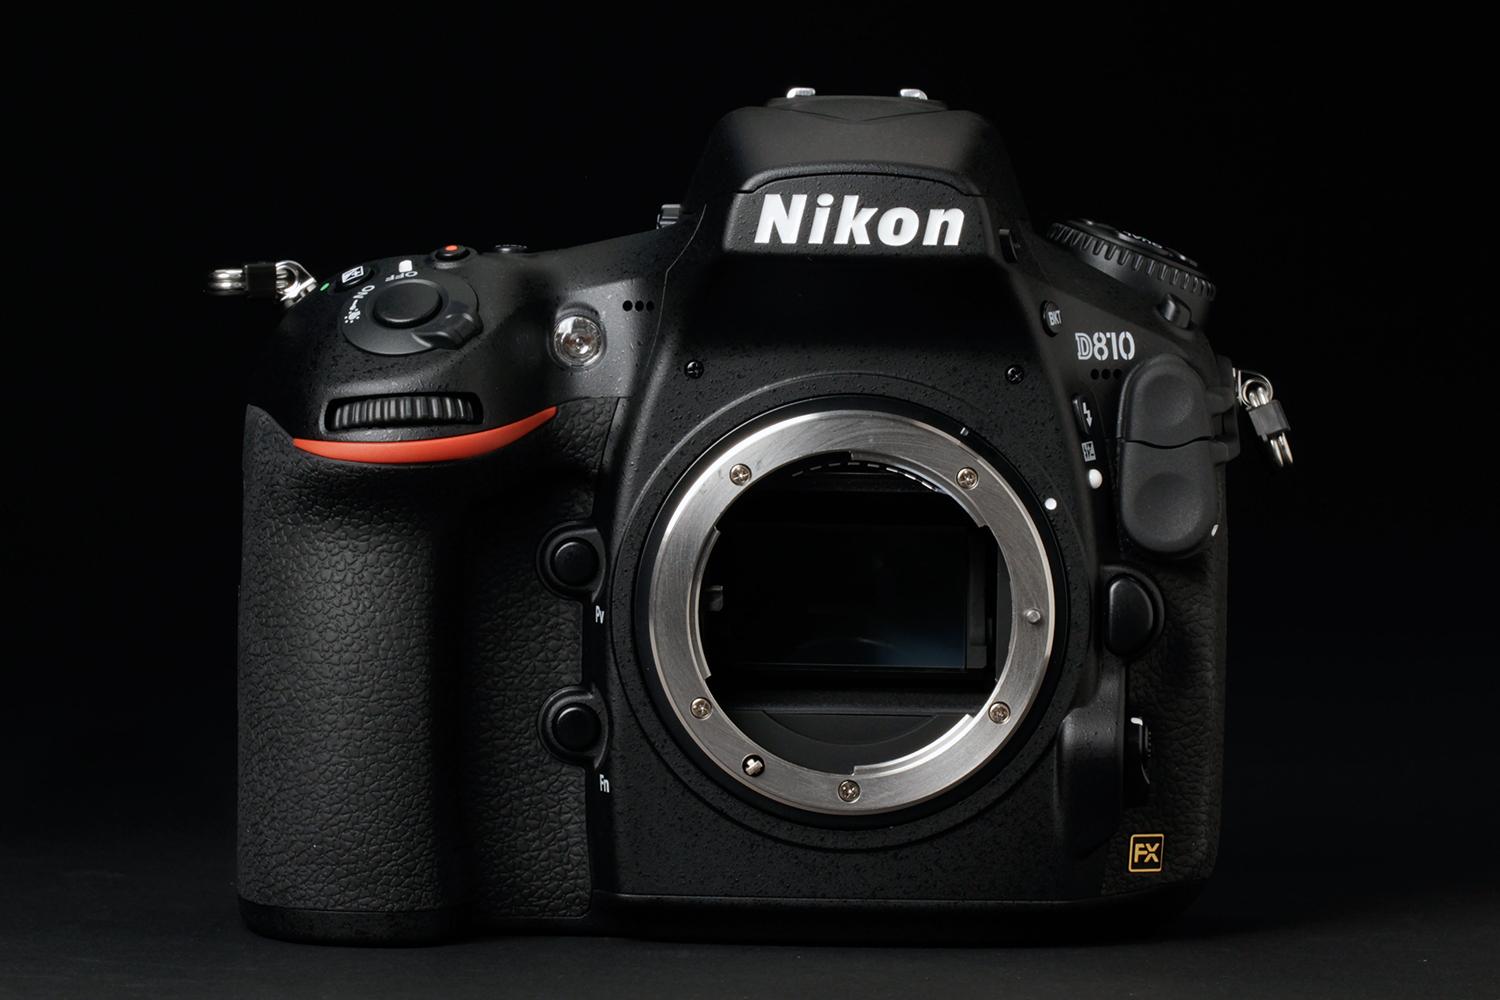 Unarmed Susceptible to Countryside Nikon D810 Review | Digital Trends